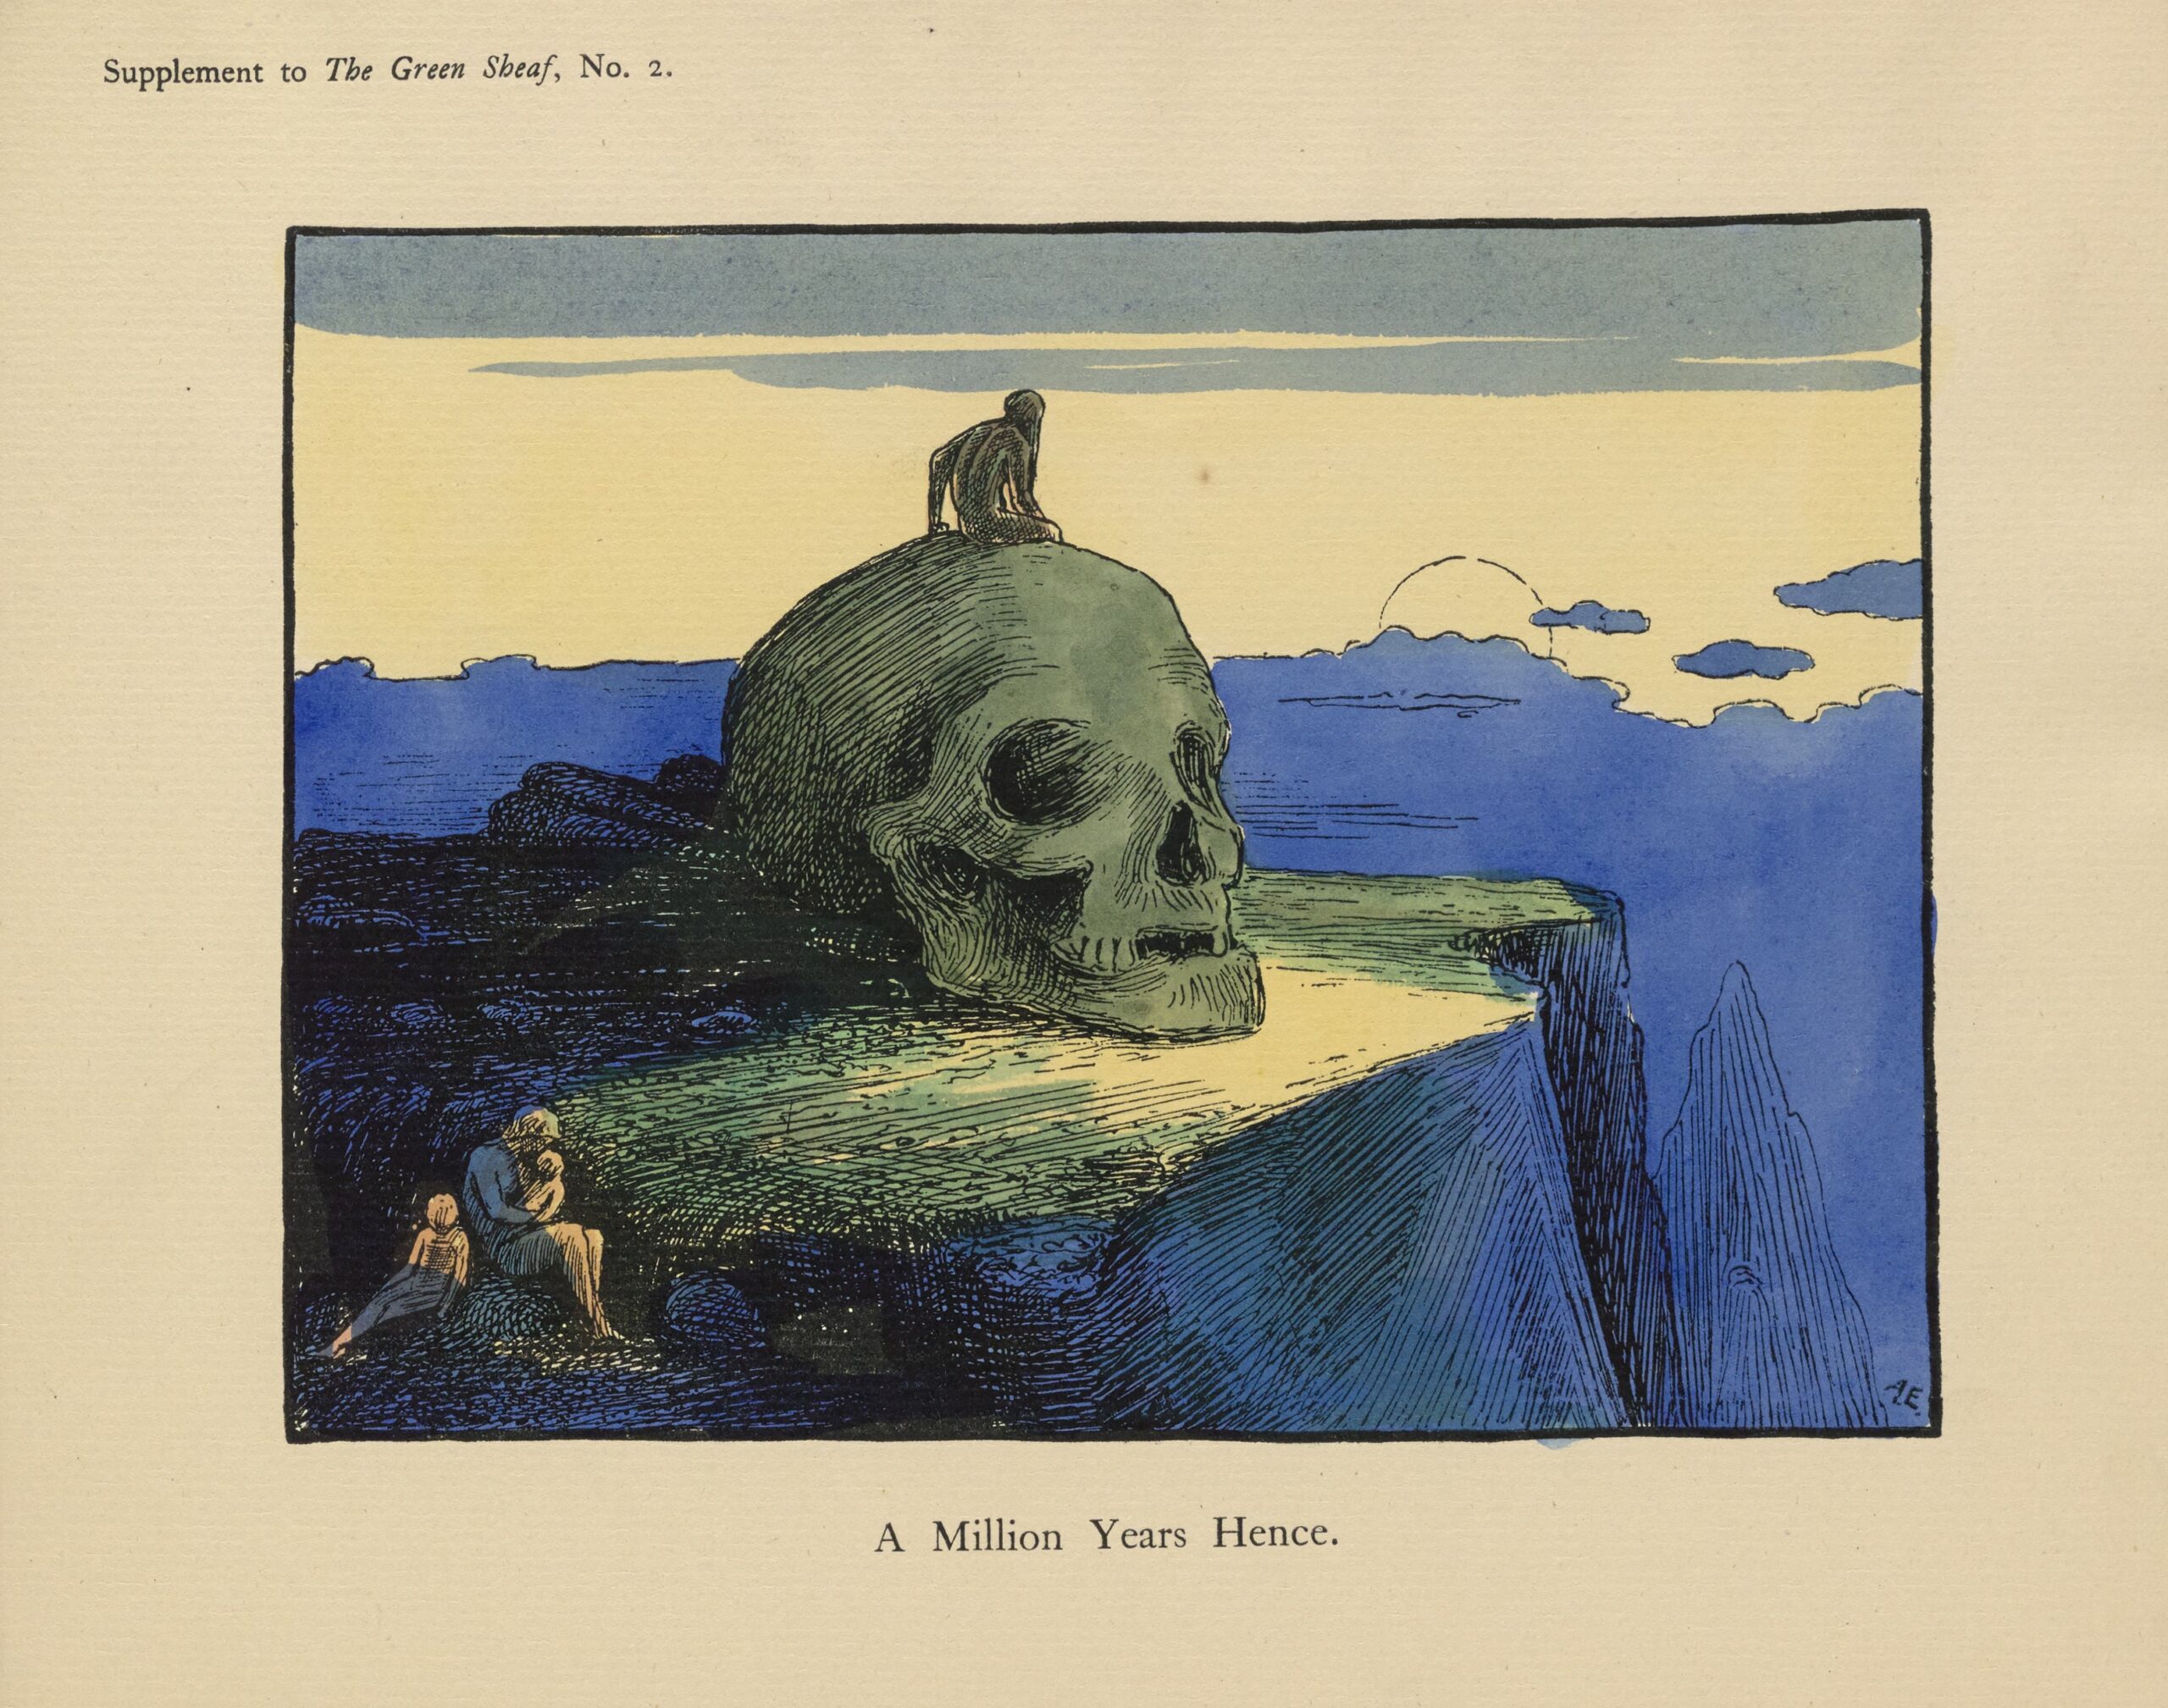 This stand-alone image is printed on heavy card stock and centered on the page, set in a black-lined rectangular frame. At the centre of the image, a naked man sits atop a large skull, facing away from the viewer, overlooking a cliff edge. The man and skull are coloured with the same shade of sickly, darkened green. The skull is missing several front teeth, and casts a dark shadow on the left side of the image plane behind it. In the right foreground, a single sunbeam illuminates three more figures coloured in pale red: a woman holding an infant, and a child sitting beside her. Beyond the cliff edge, shadowed blue clouds occupy the background, and the faint outline of the sun is visible partially behind a cloud.